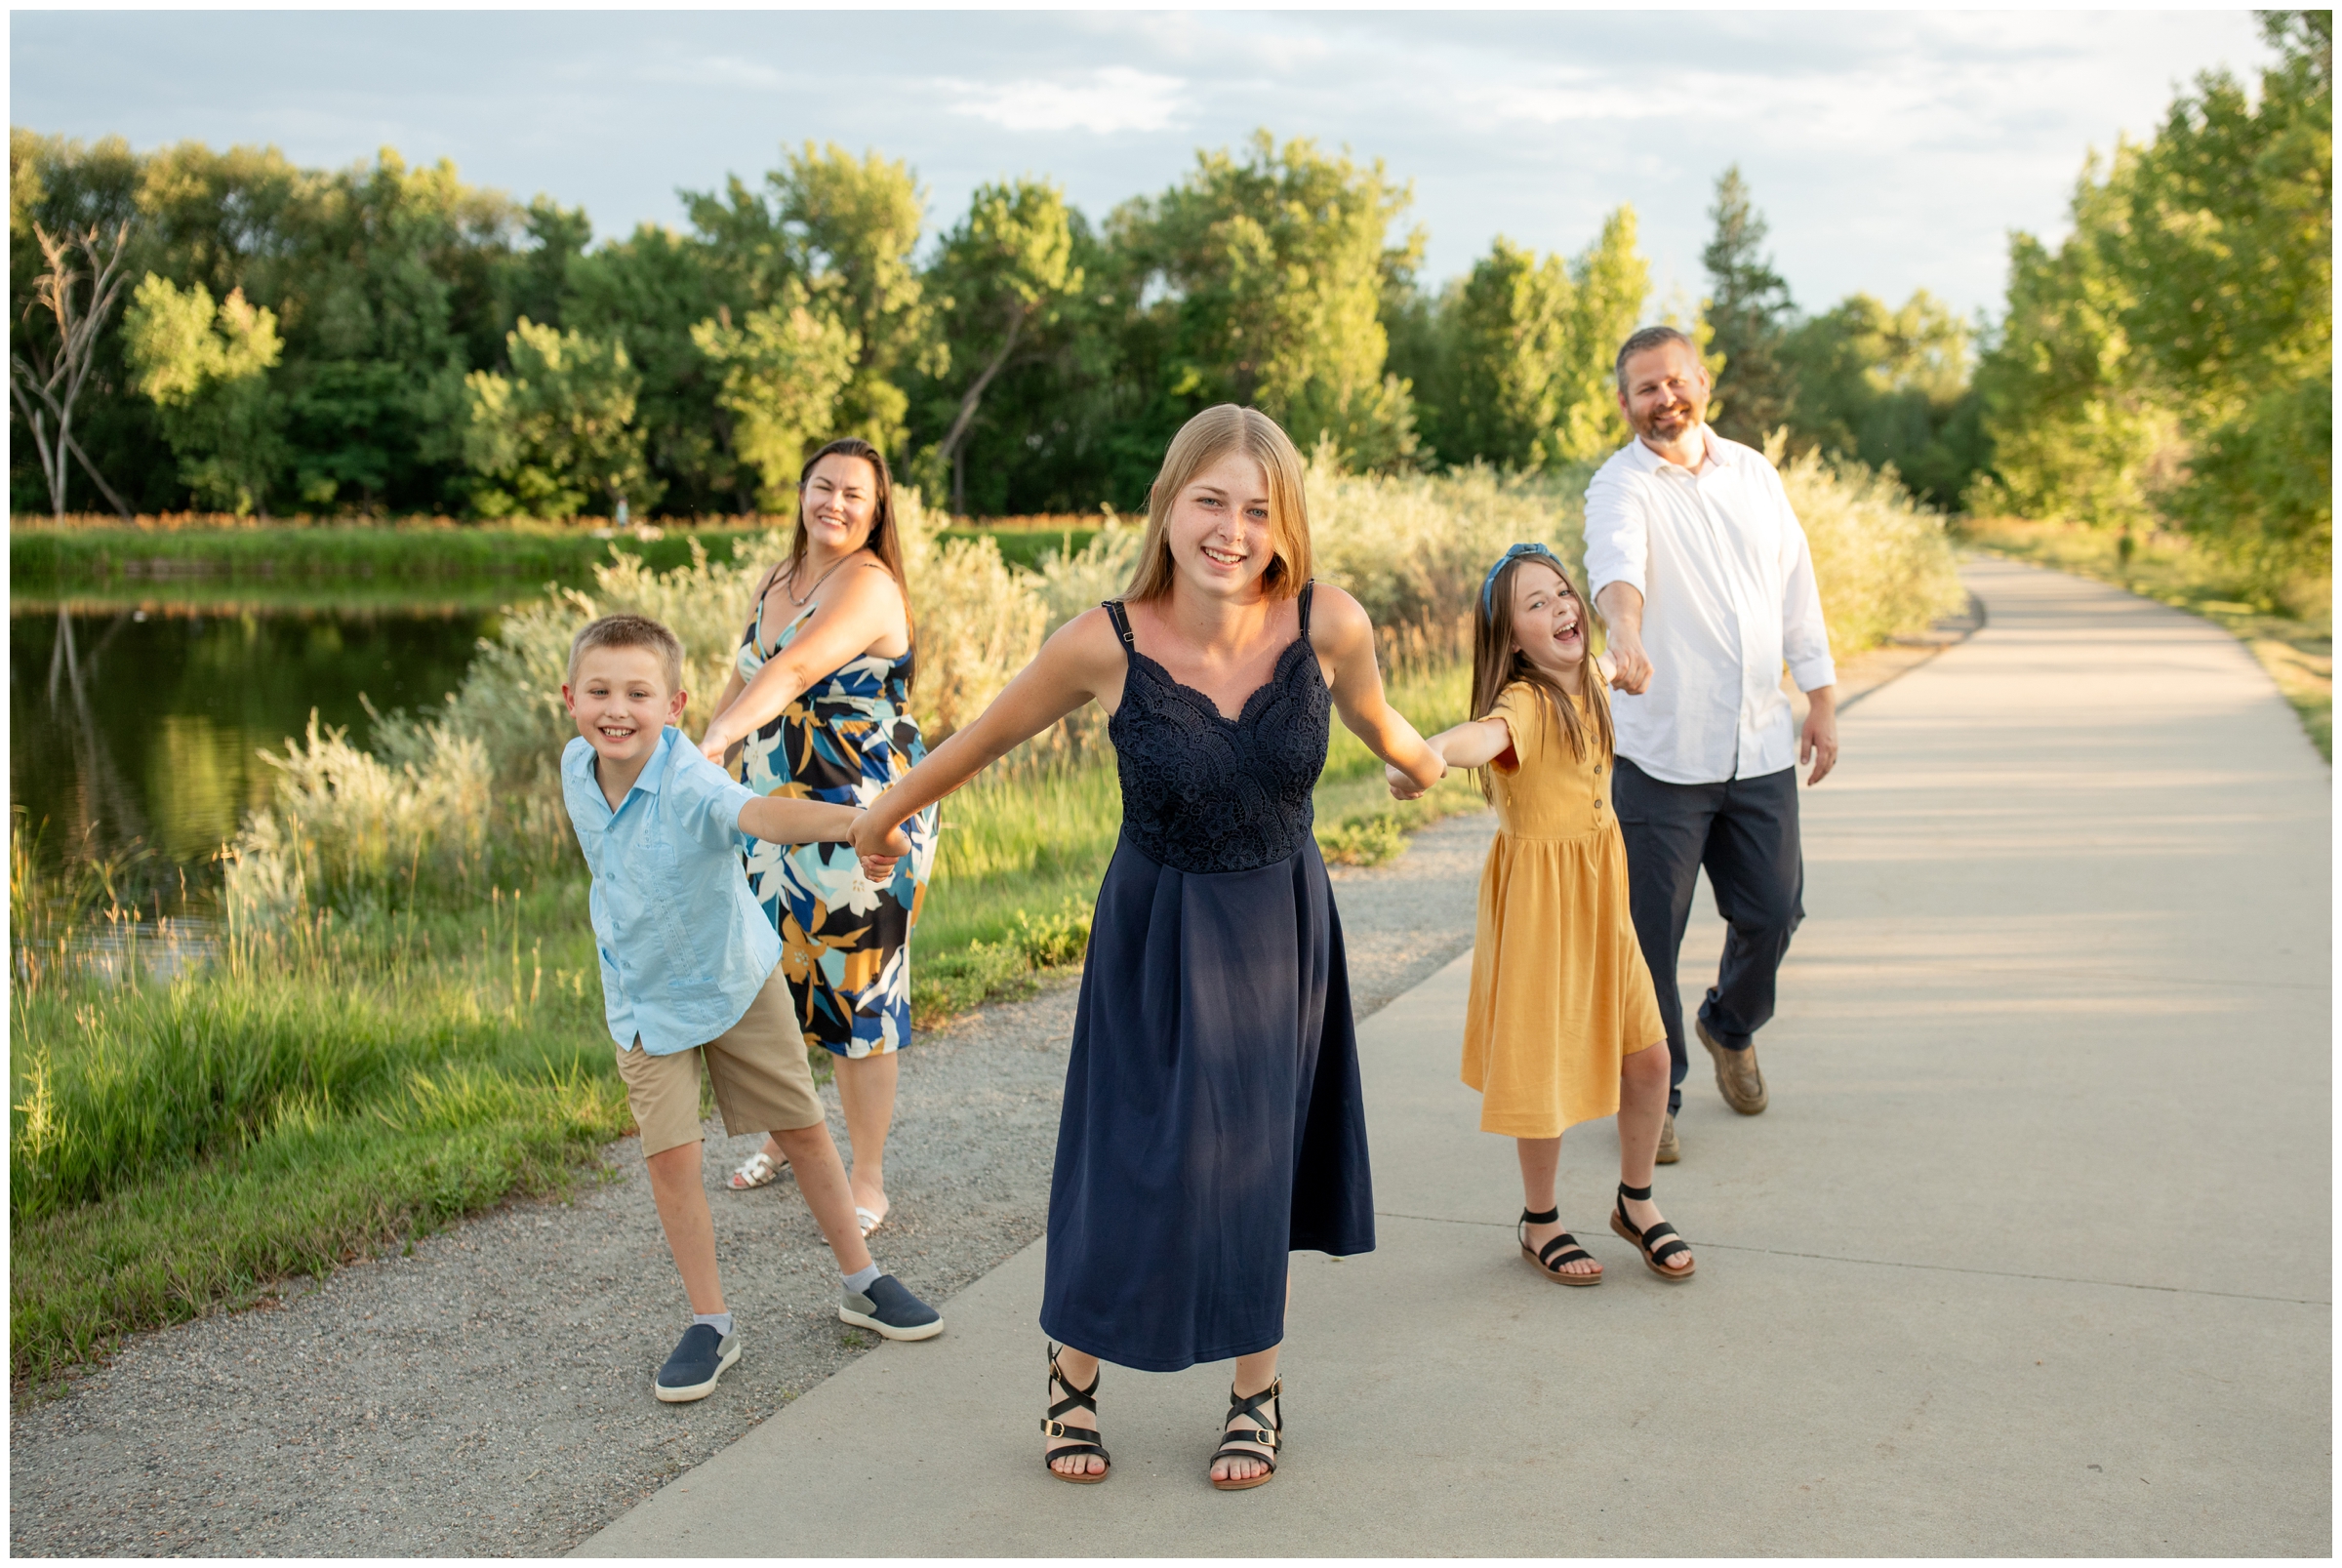 candid Longmont family photography inspiration at Golden Ponds